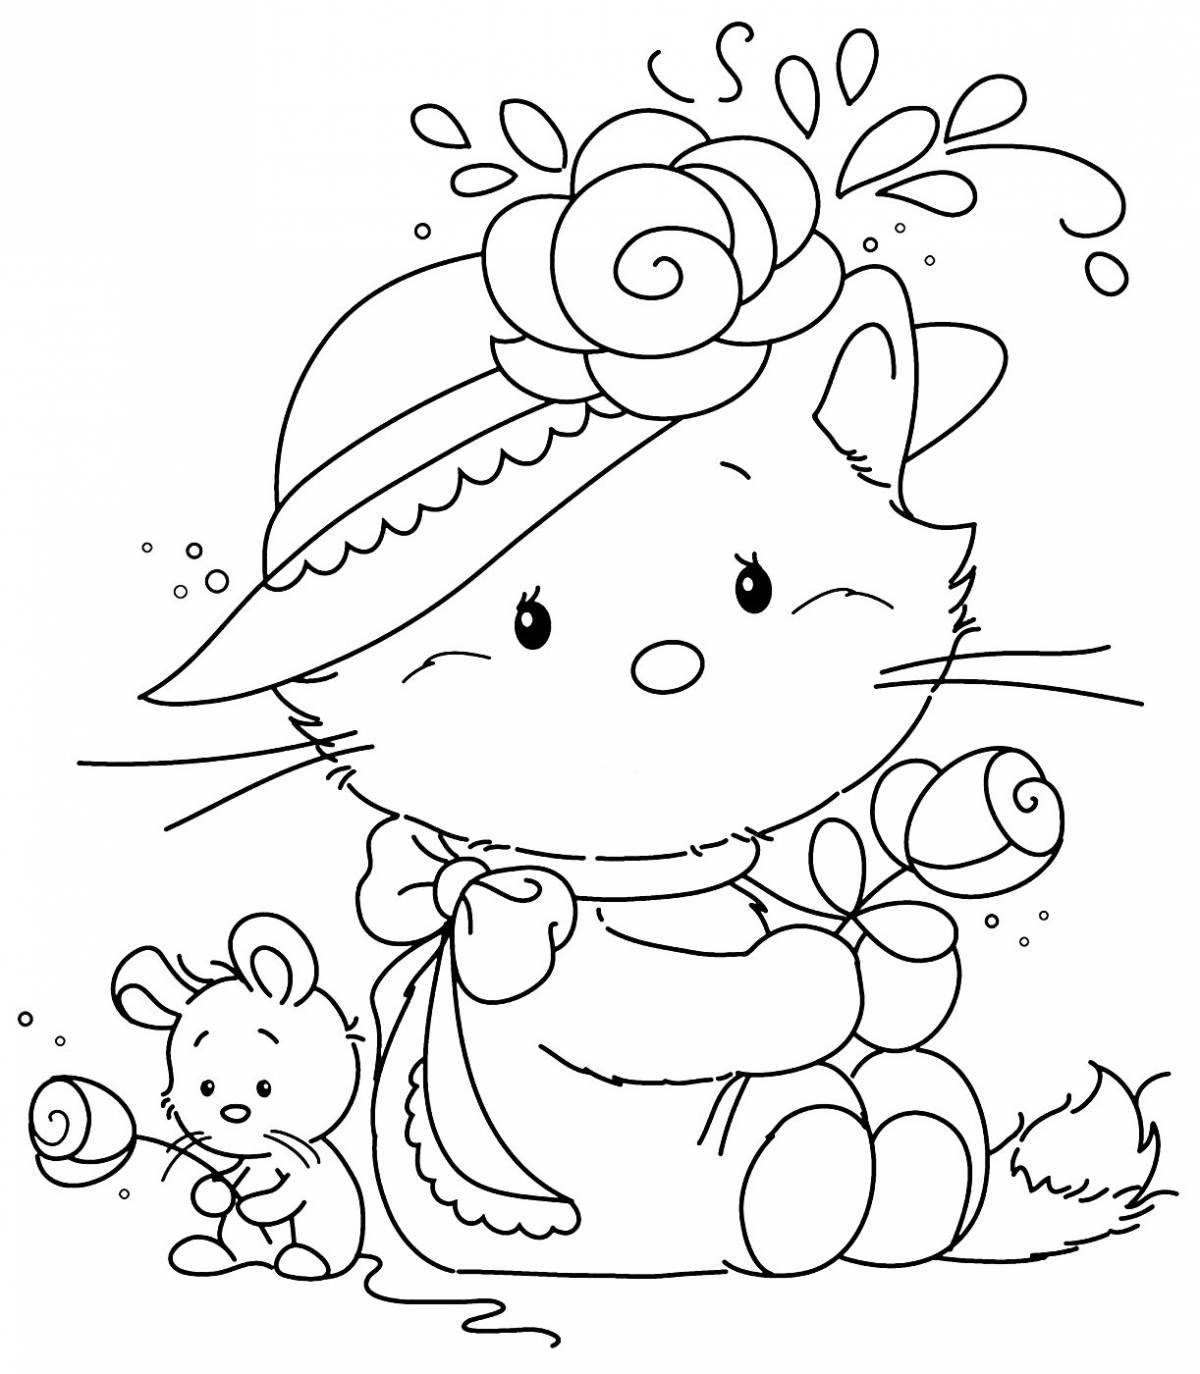 Coloring page charming cat basik